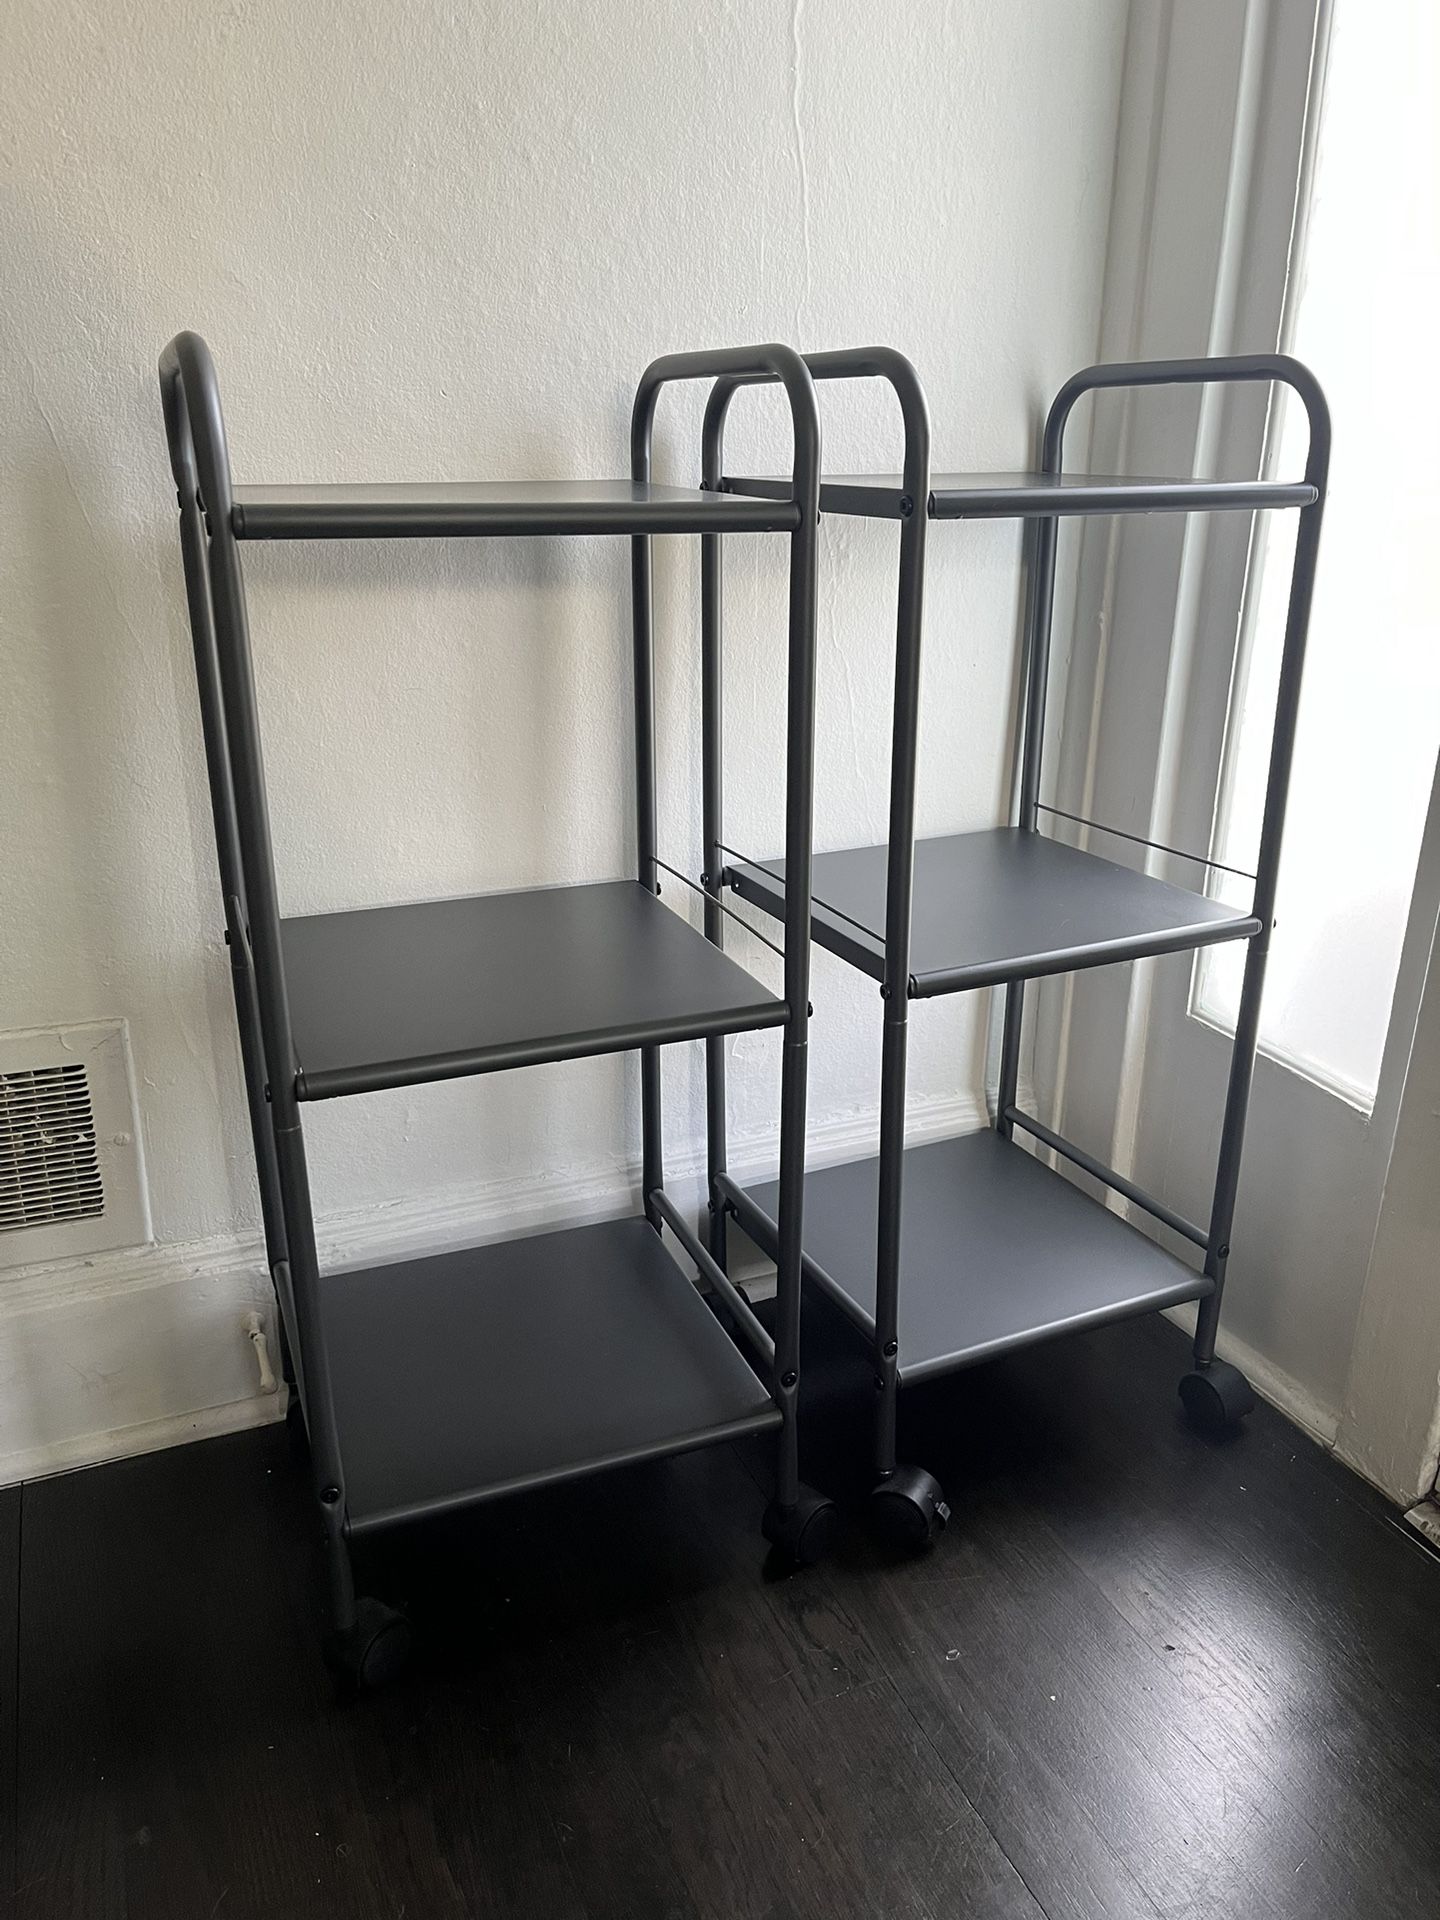 Metal Racks, Shelves Or End Tables With Wheels x2